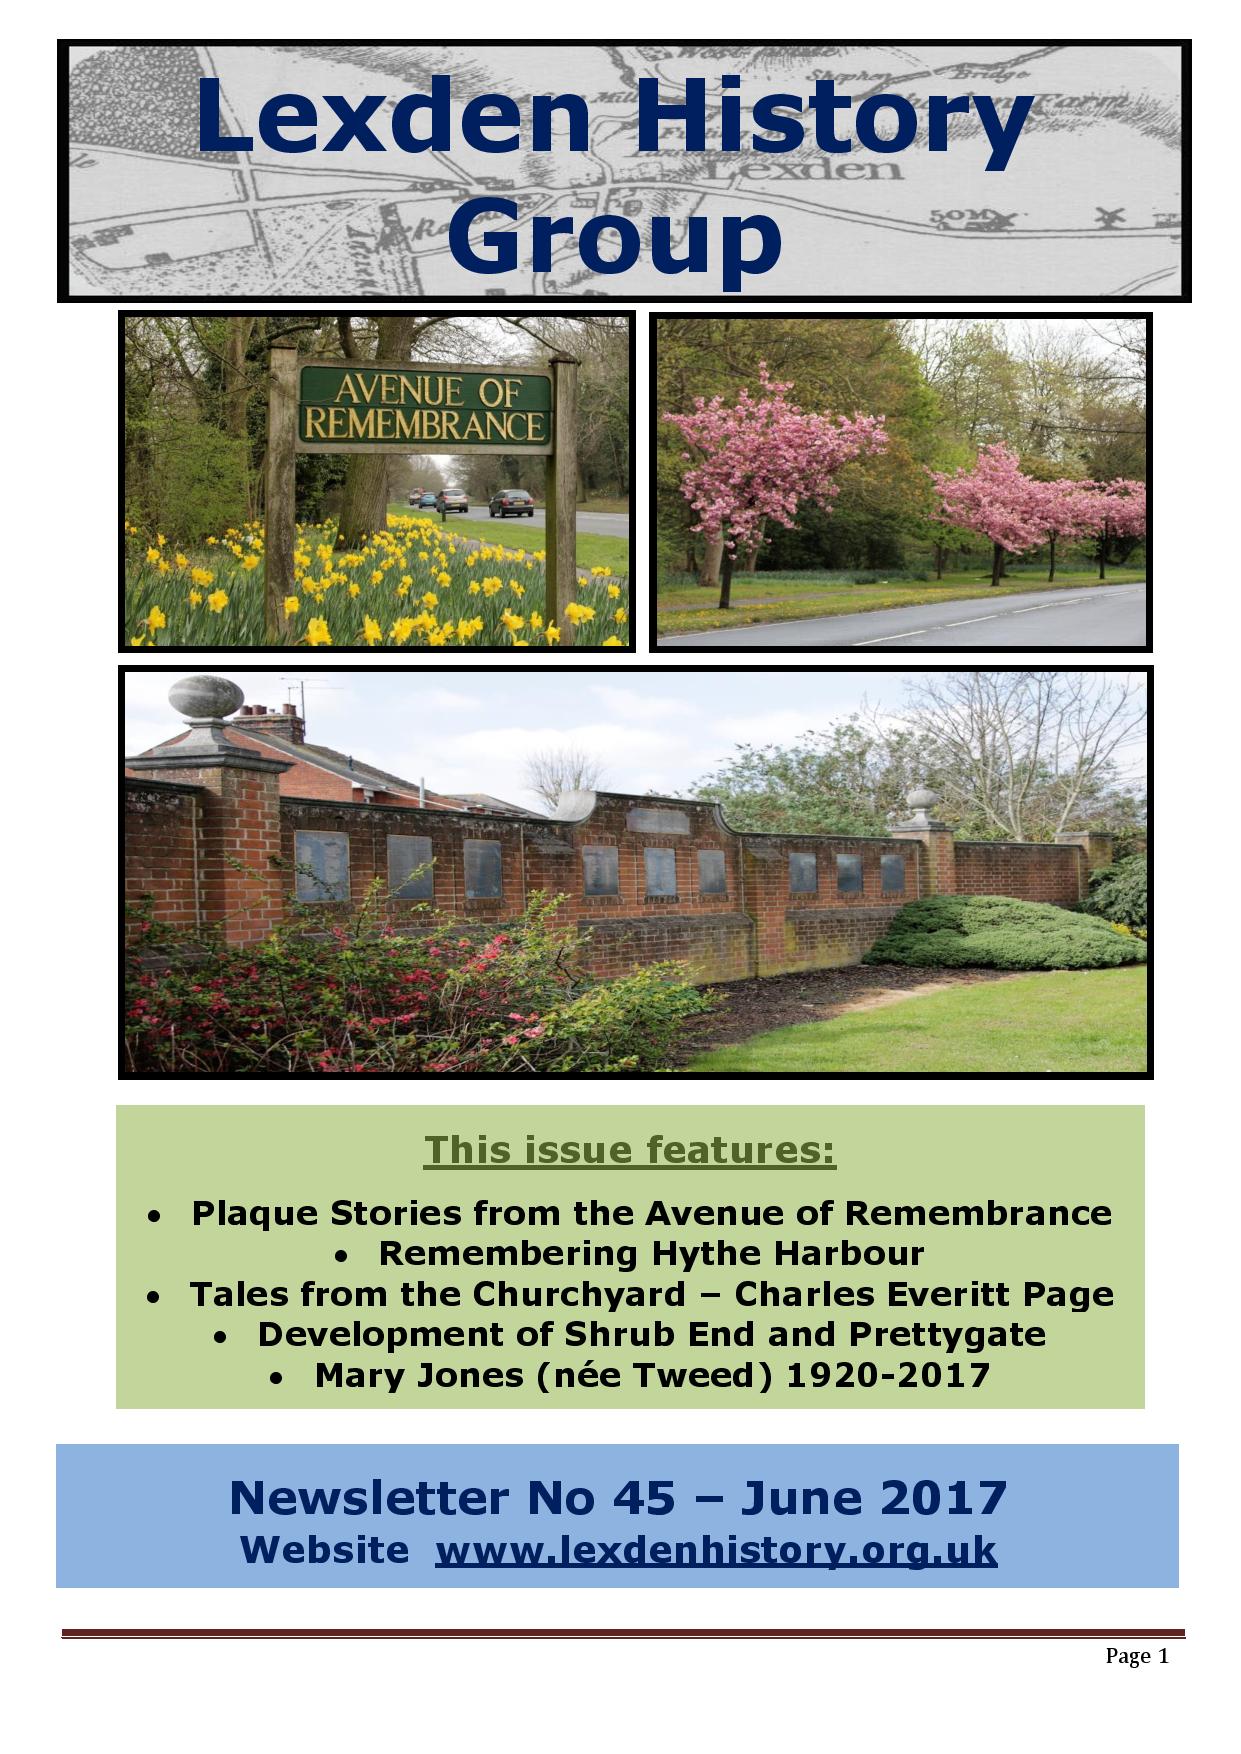 June 2017 Issue 45 – Lexden history Group